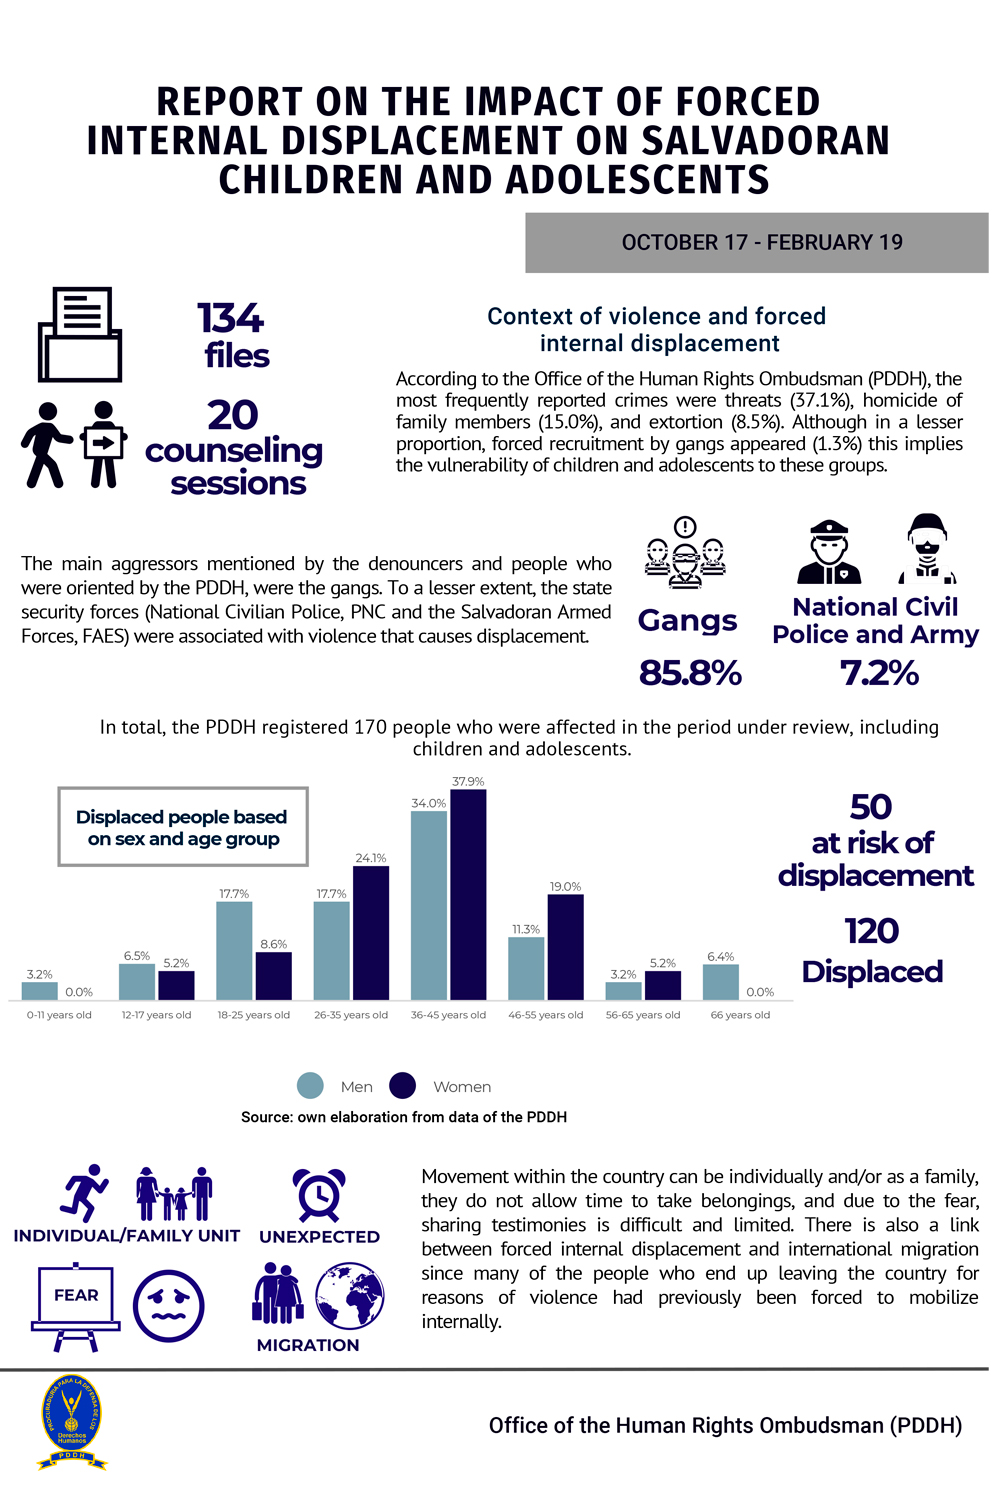 REPORT ON THE IMPACT OF FORCED INTERNAL DISPLACEMENT ON SALVADORAN CHILDREN AND ADOLESCENTS